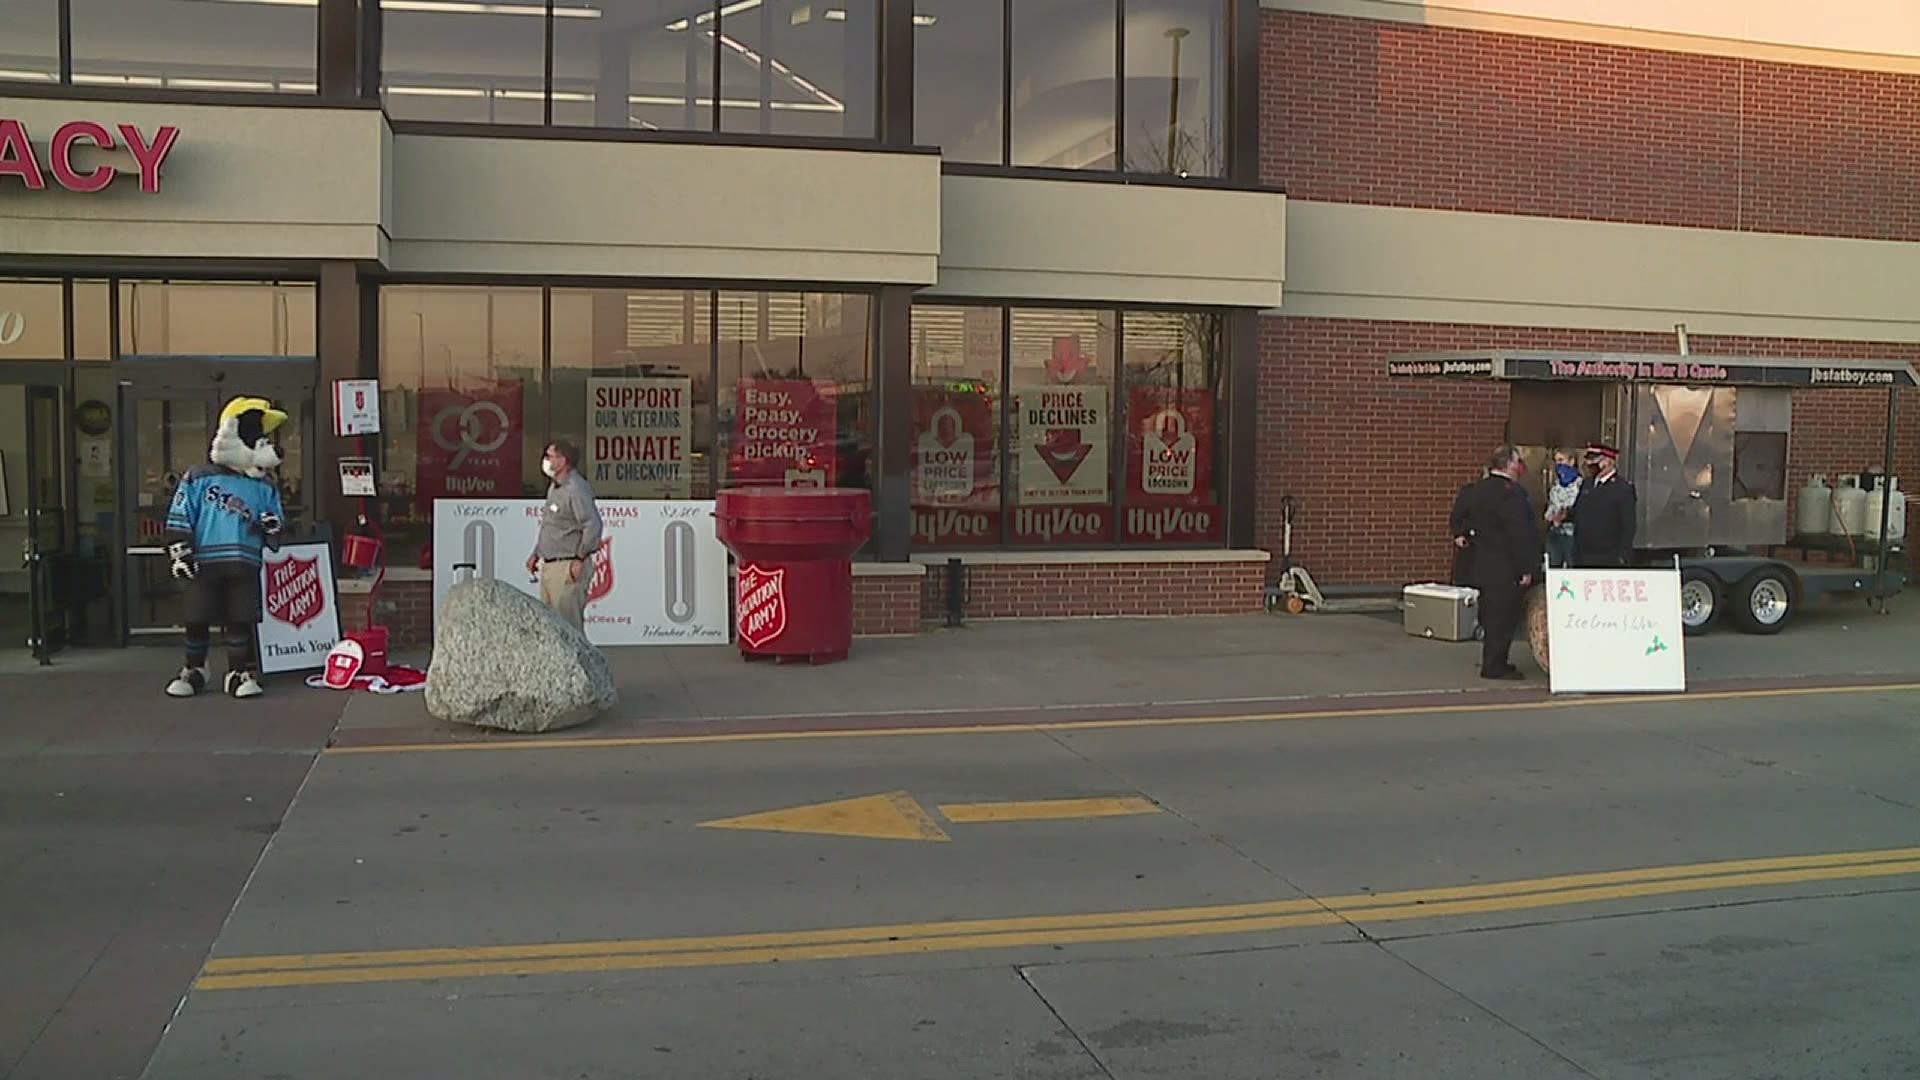 The Salvation Army said at the kickoff event in Bettendorf all volunteer bell ringers will wear masks, and the kettles will be sanitized regularly.